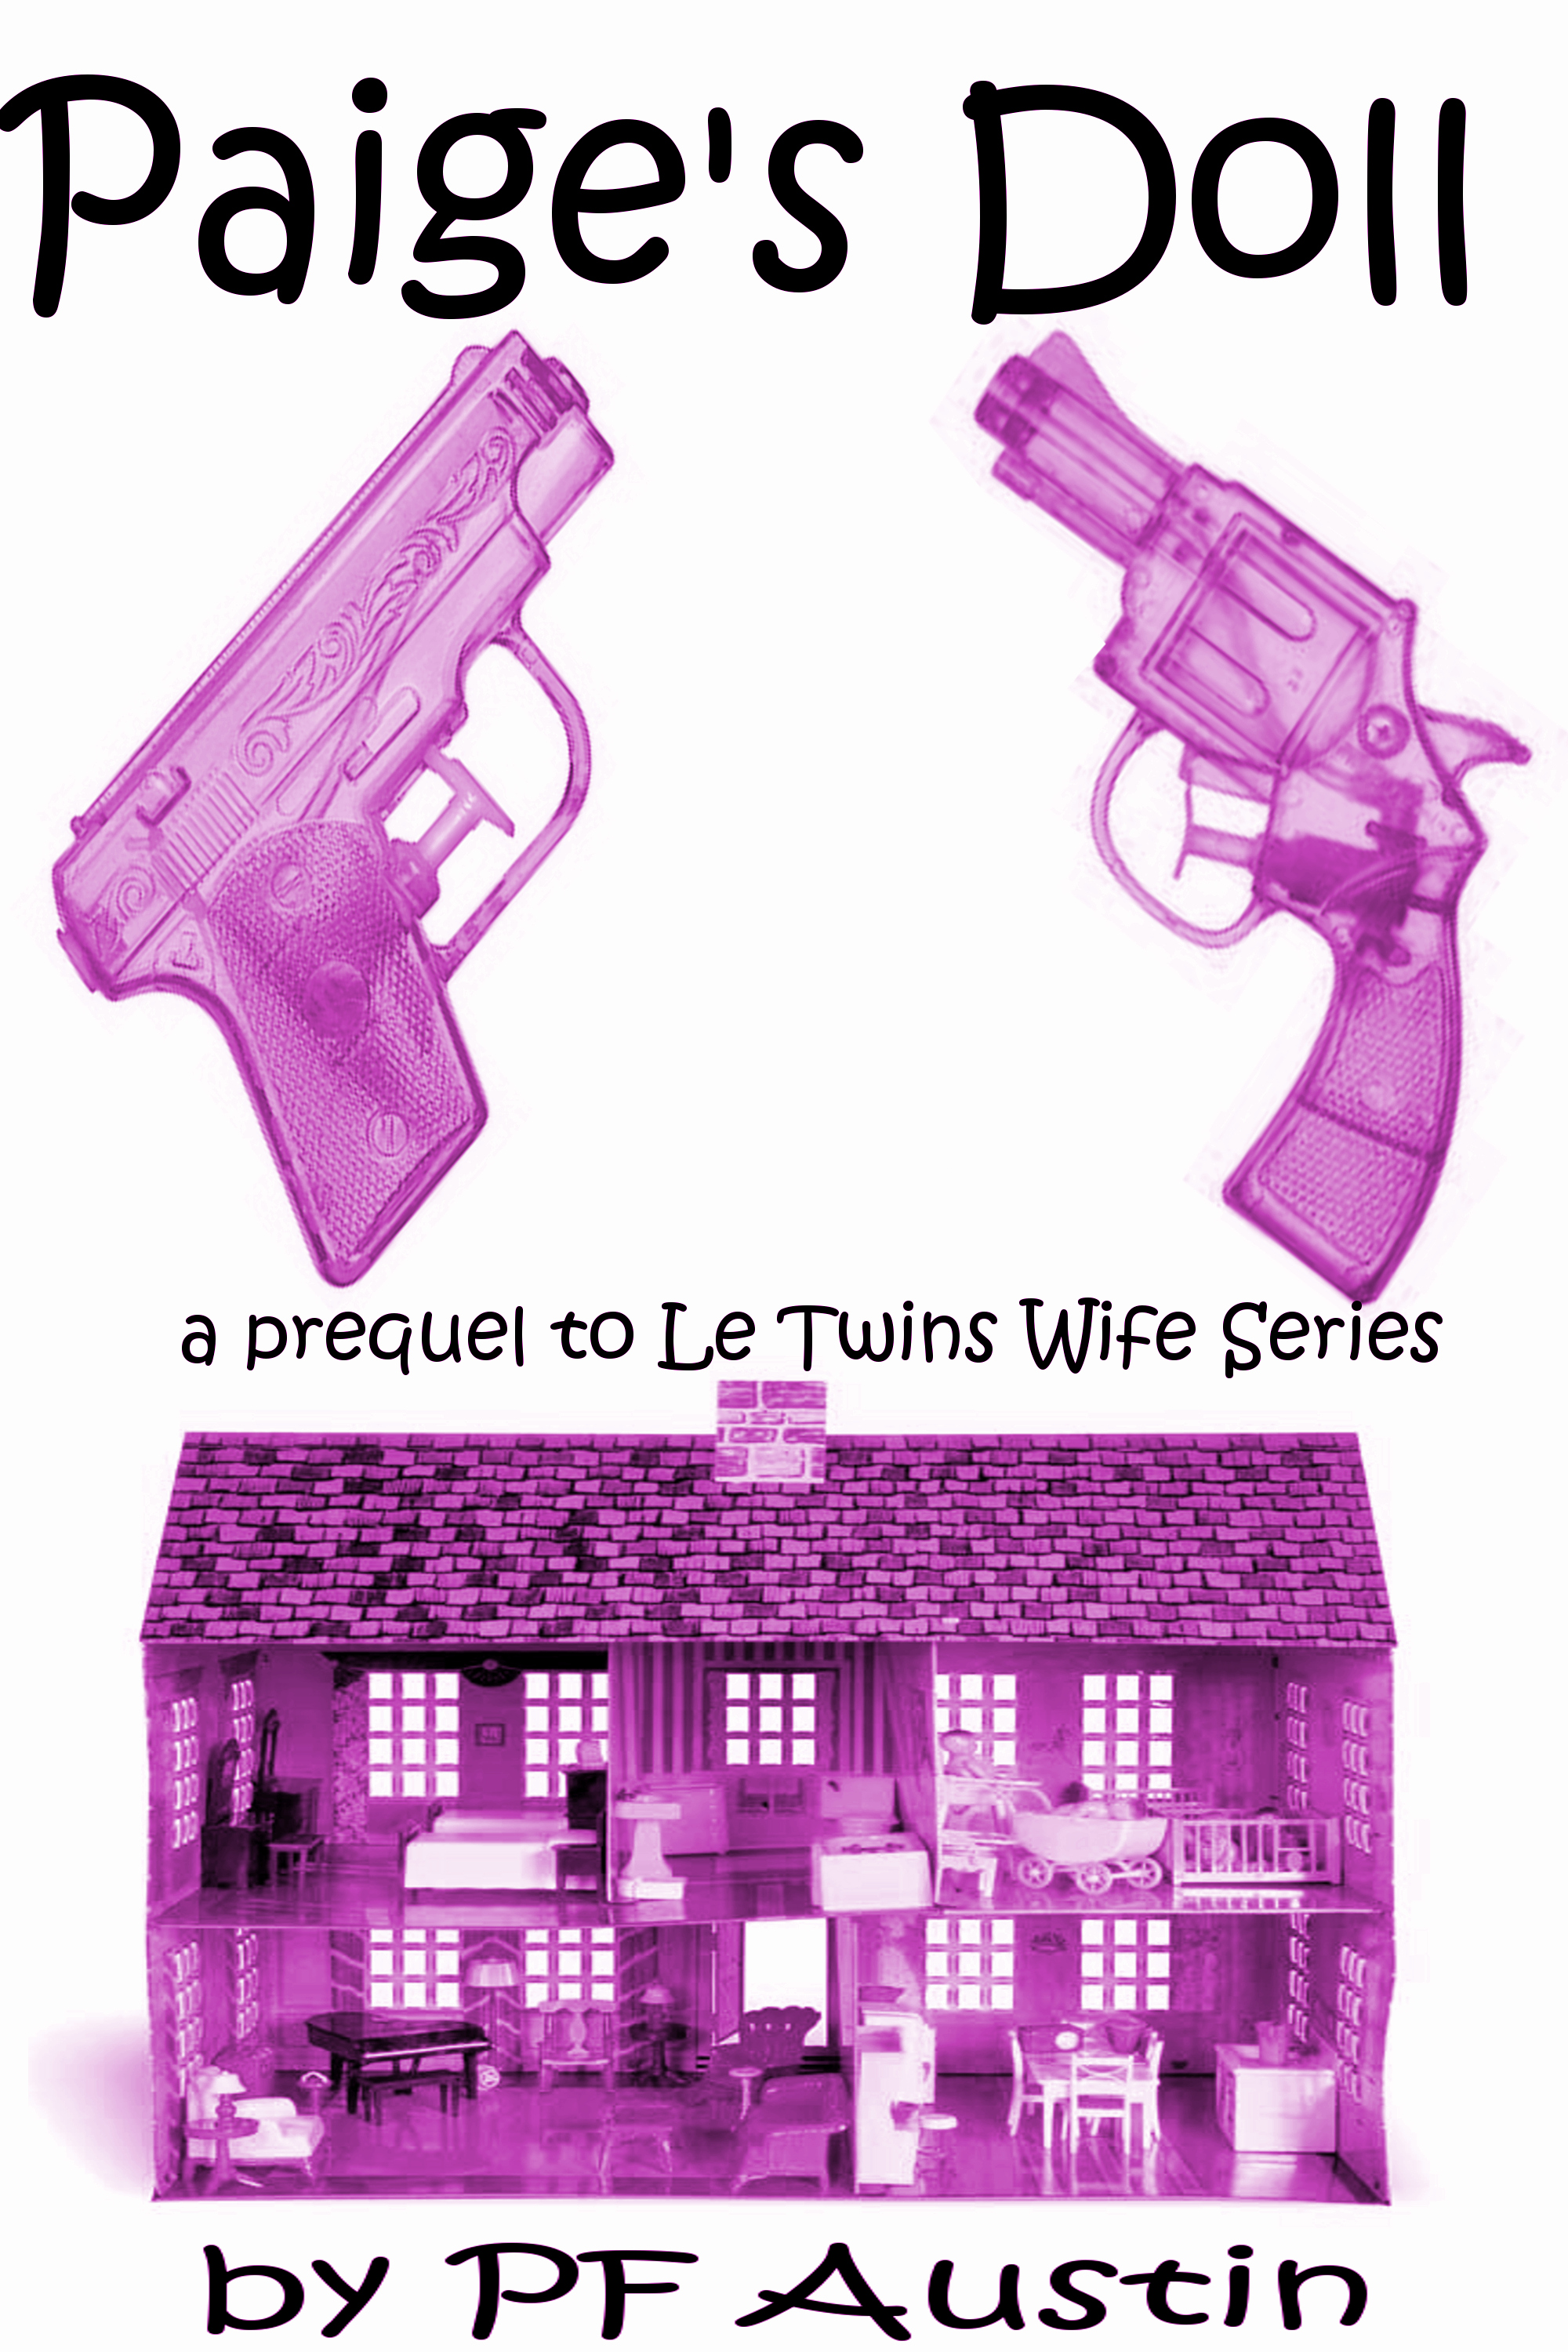 Paige's Doll-a prequel to Le Twins Wife Series